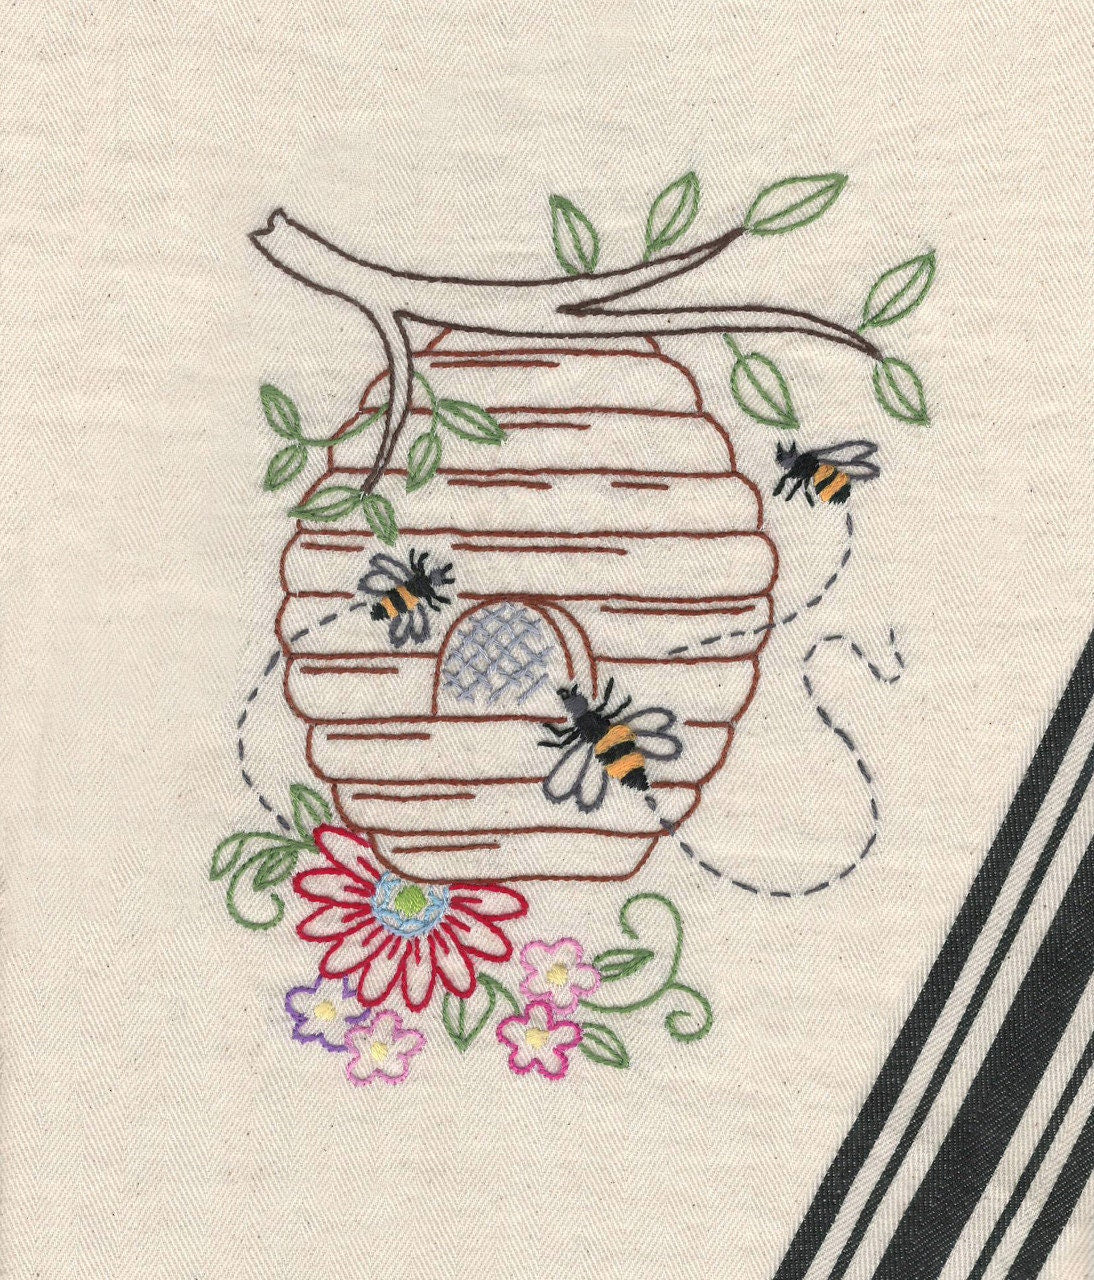 Buzzing Bees Aunt Martha's #4038 Vintage Embroidery Hot Iron Transfer Pattern